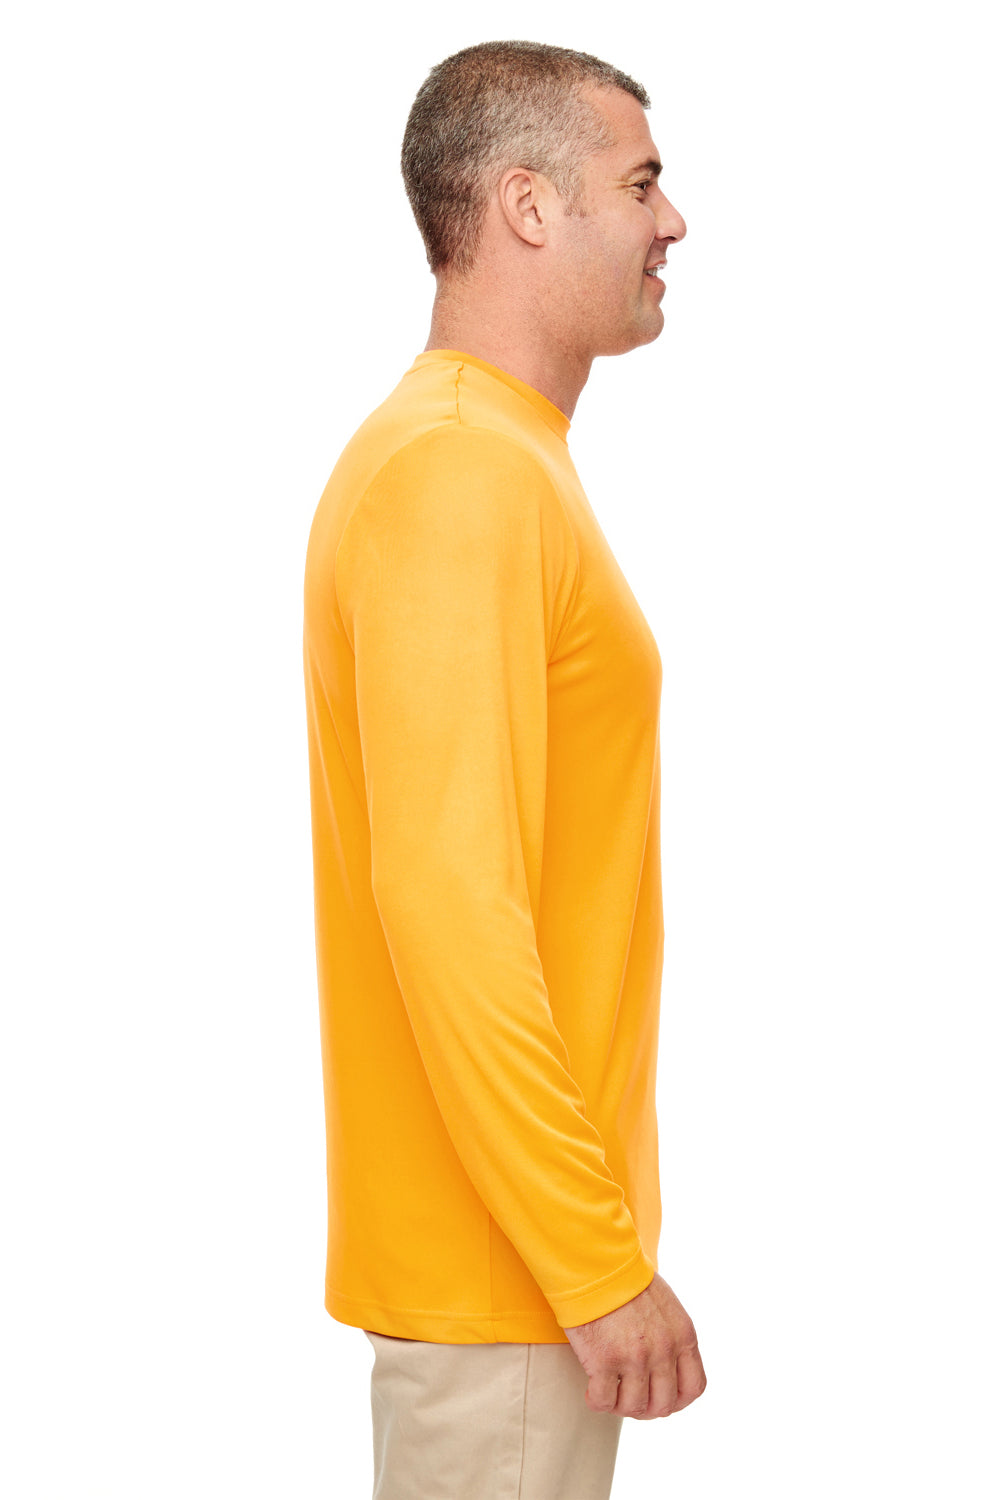 UltraClub 8622 Mens Cool & Dry Performance Moisture Wicking Long Sleeve Crewneck T-Shirt Gold Side